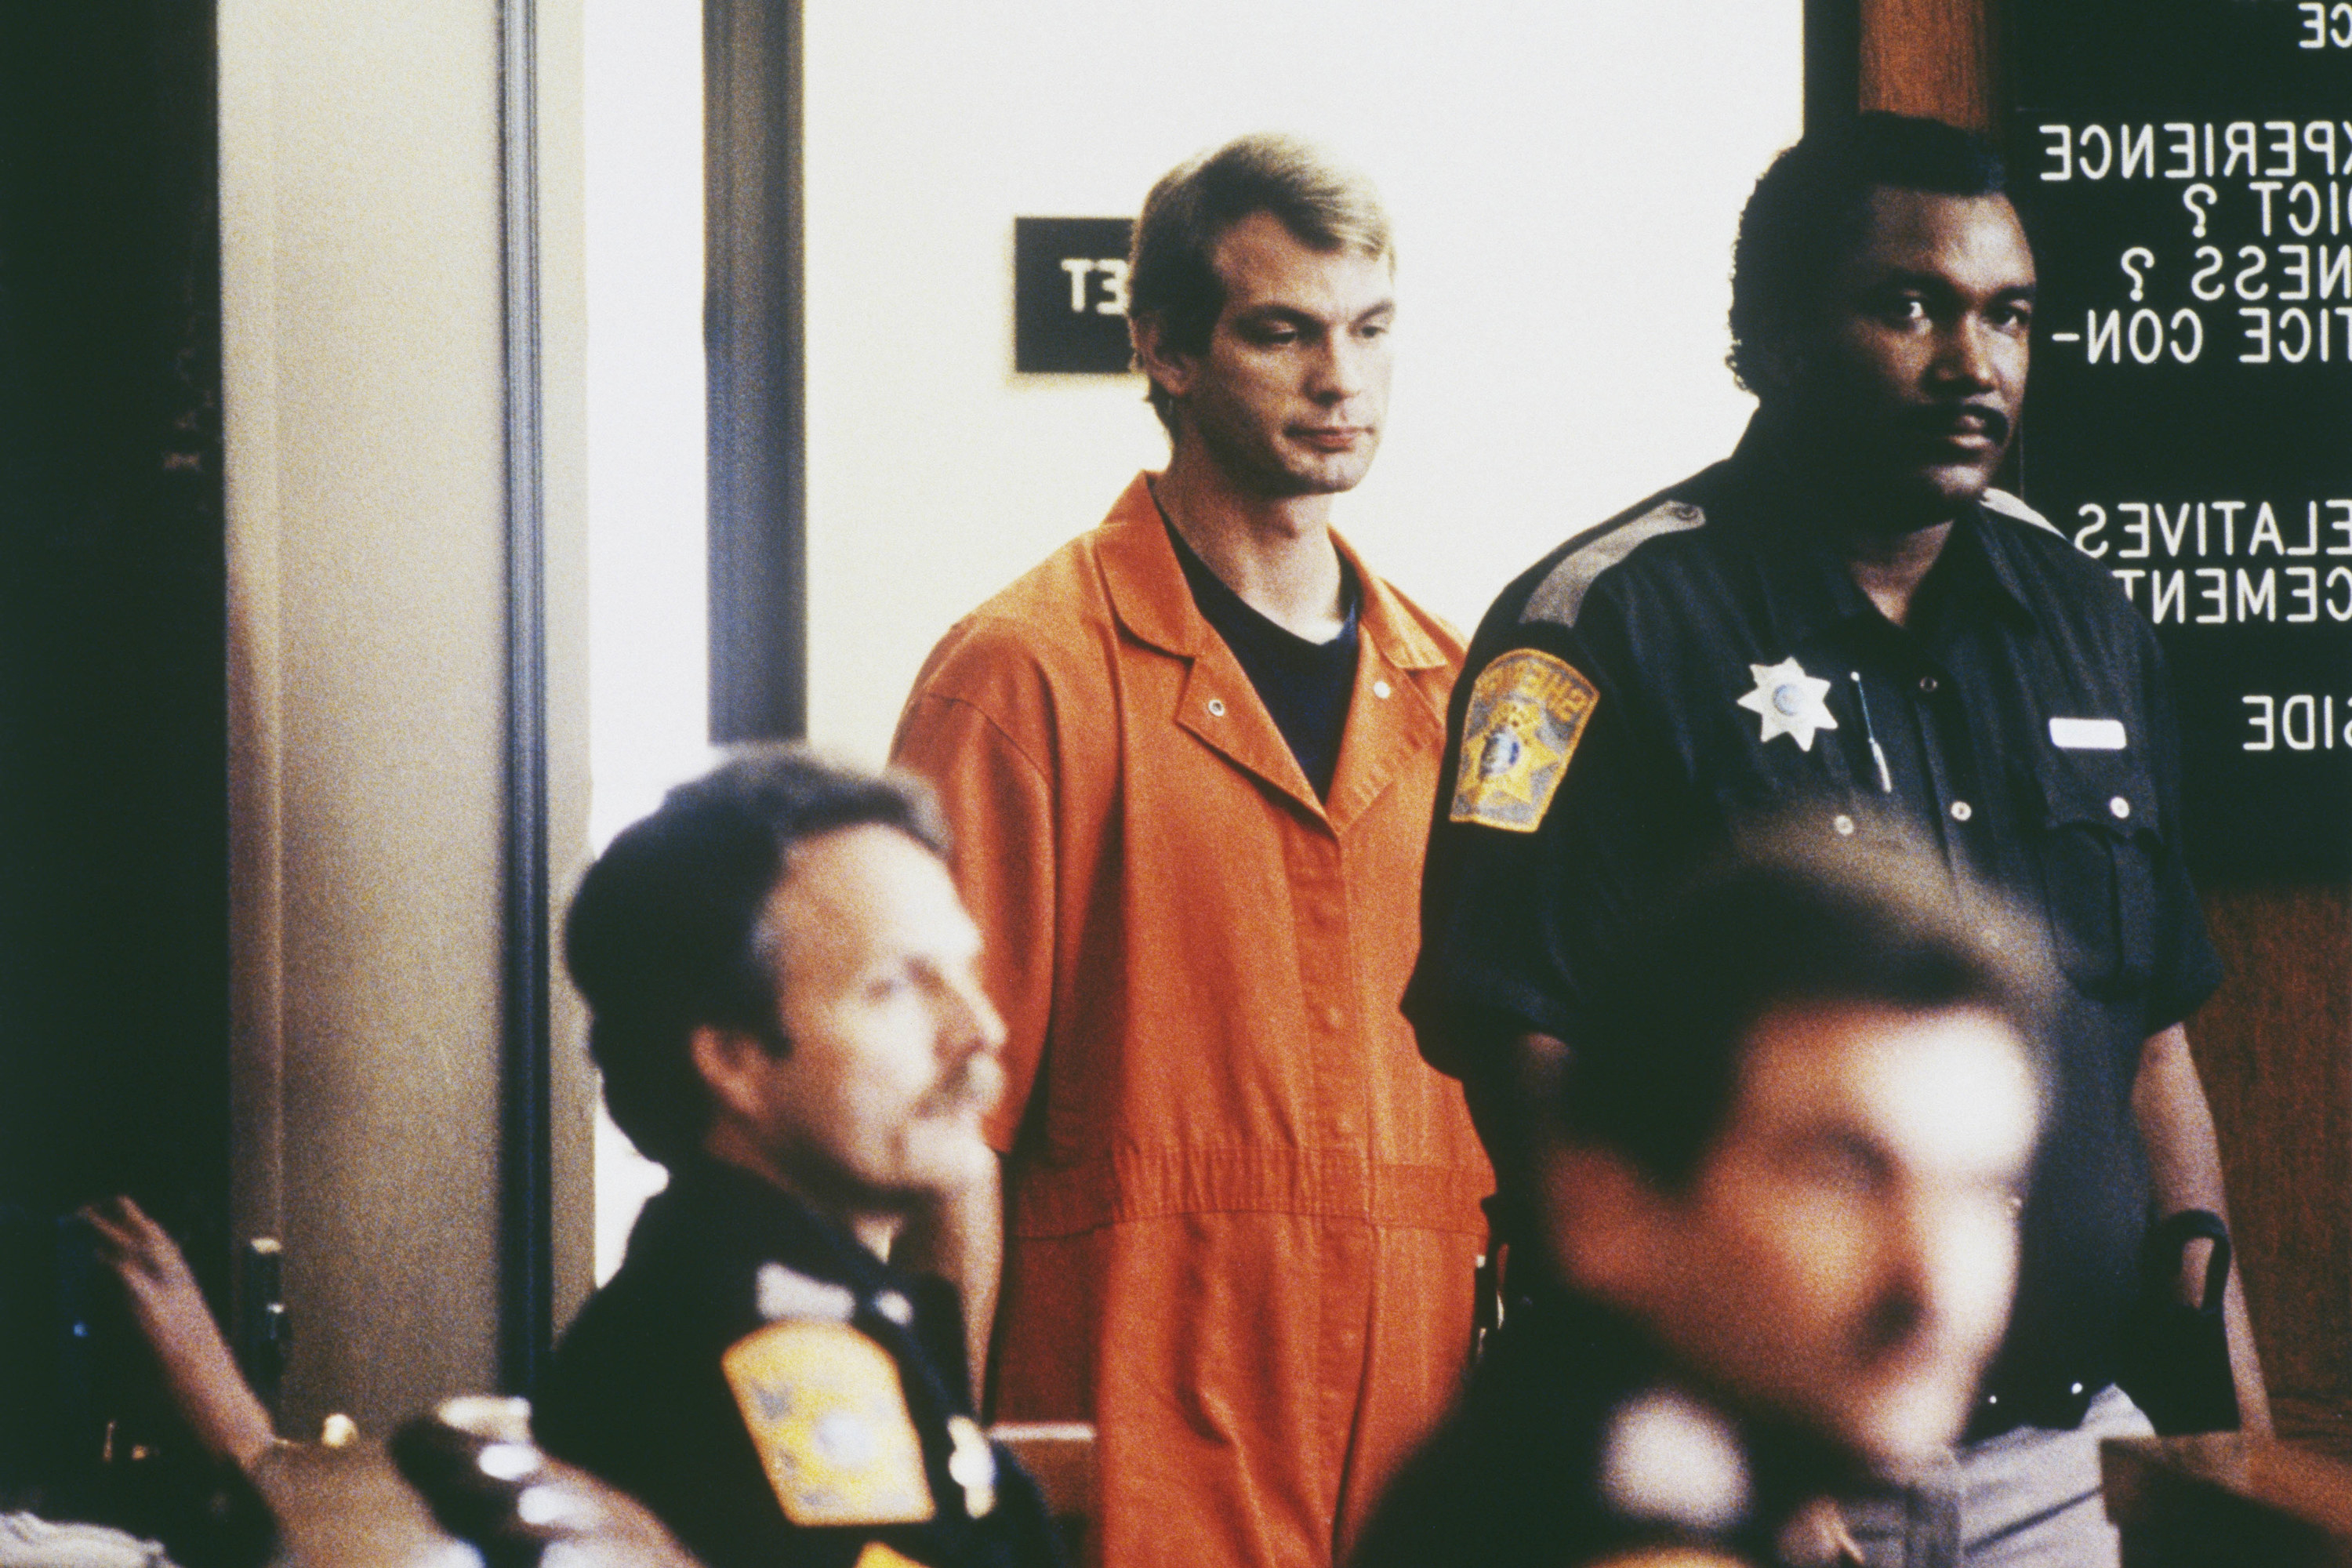 The real Jeffrey Dahmer being led into the courthouse by an officer